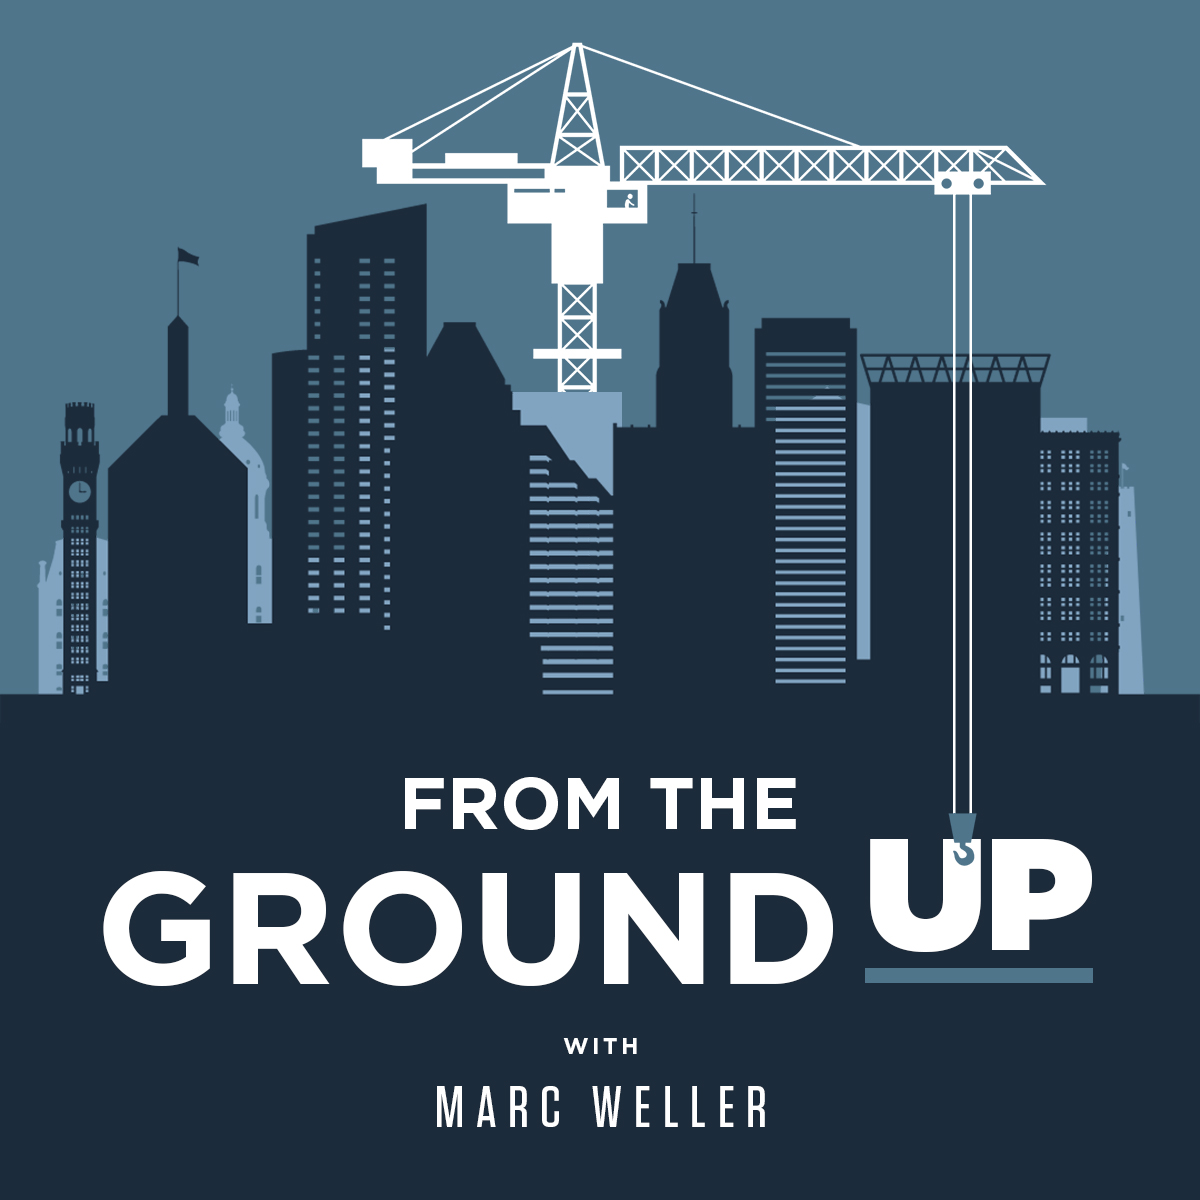 Making Places Better: The Future of Weller Development | 12